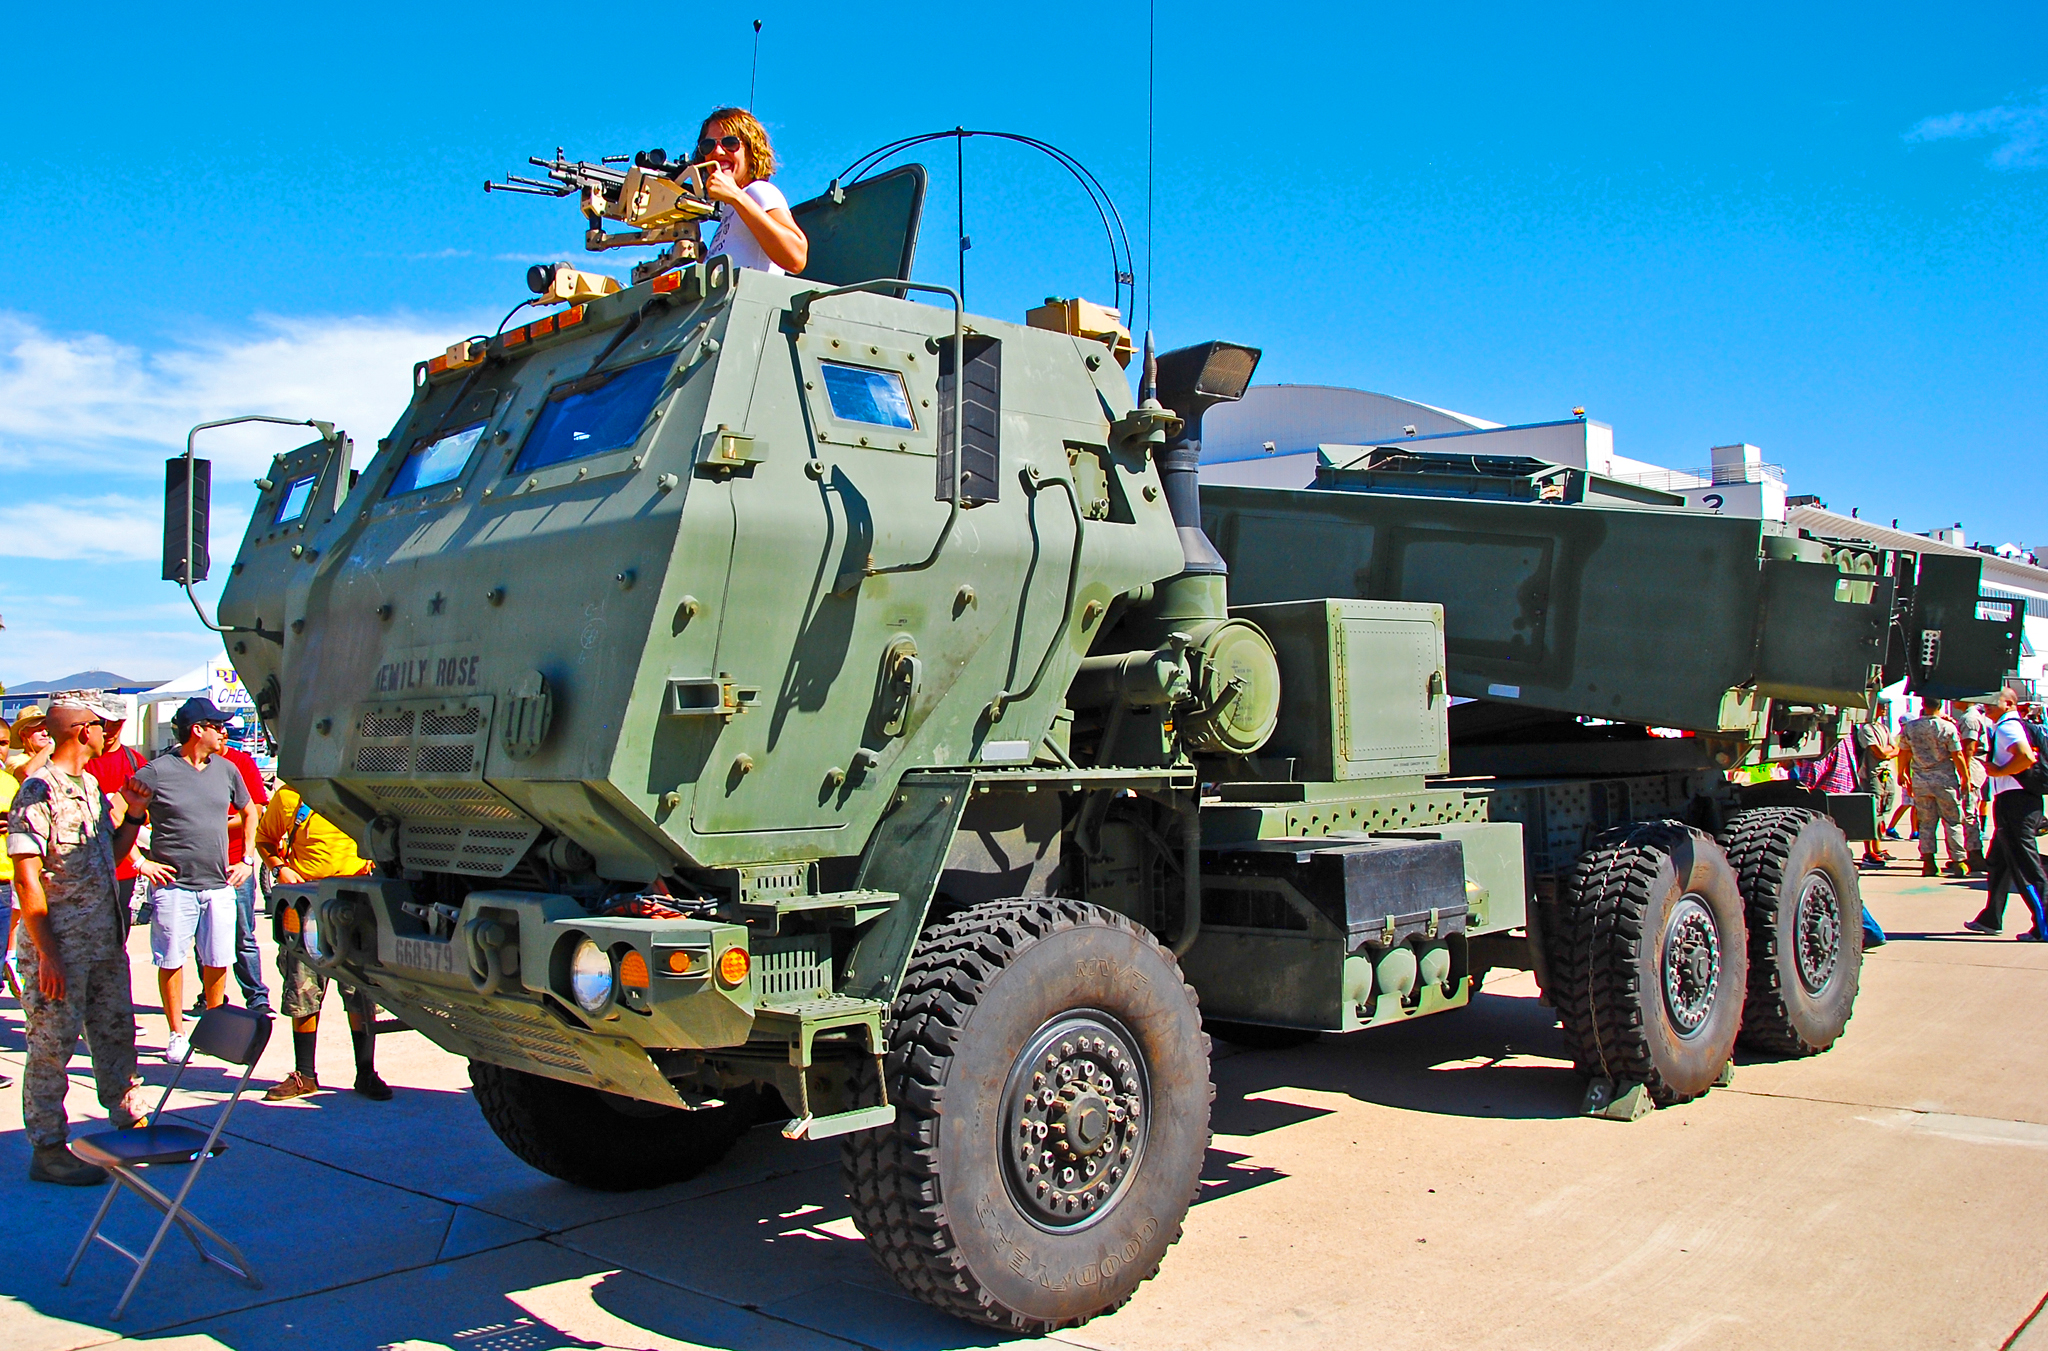 File:M142 High Mobility Artillery Rocket System (HIMARS) 668579 EMILY ROSE (14992404654).jpg - Wikimedia Commons